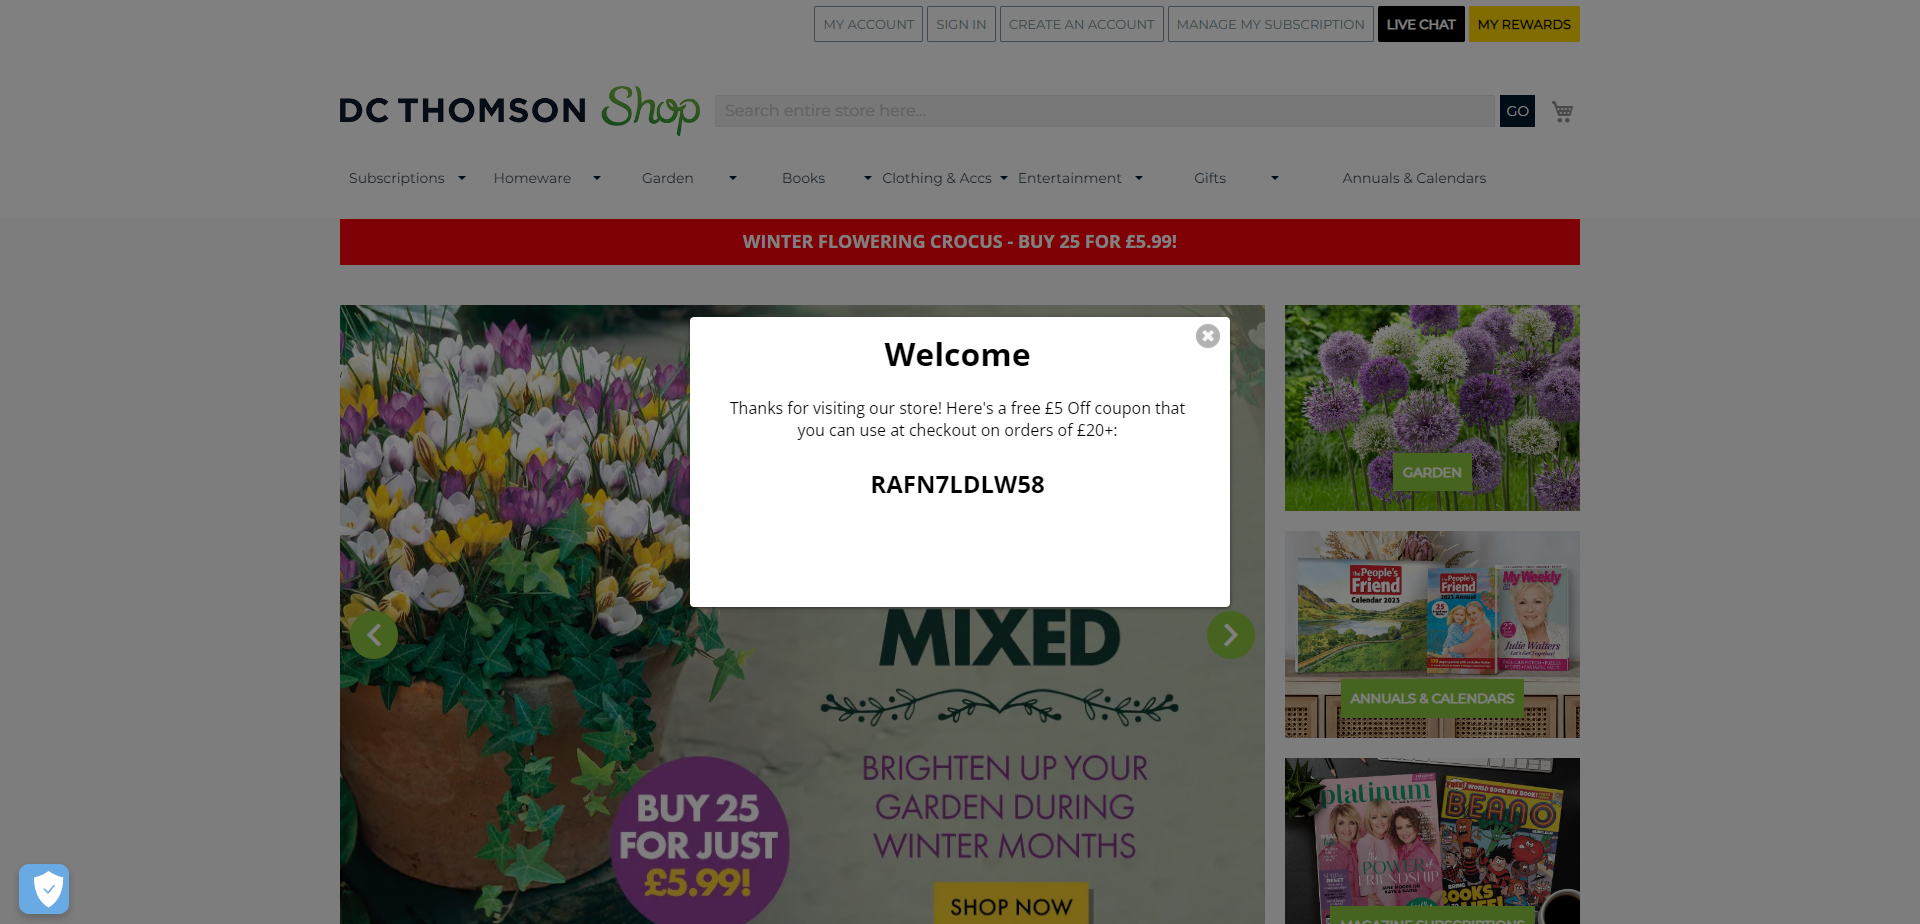 Referral Landing Page for DC Thomson Shop